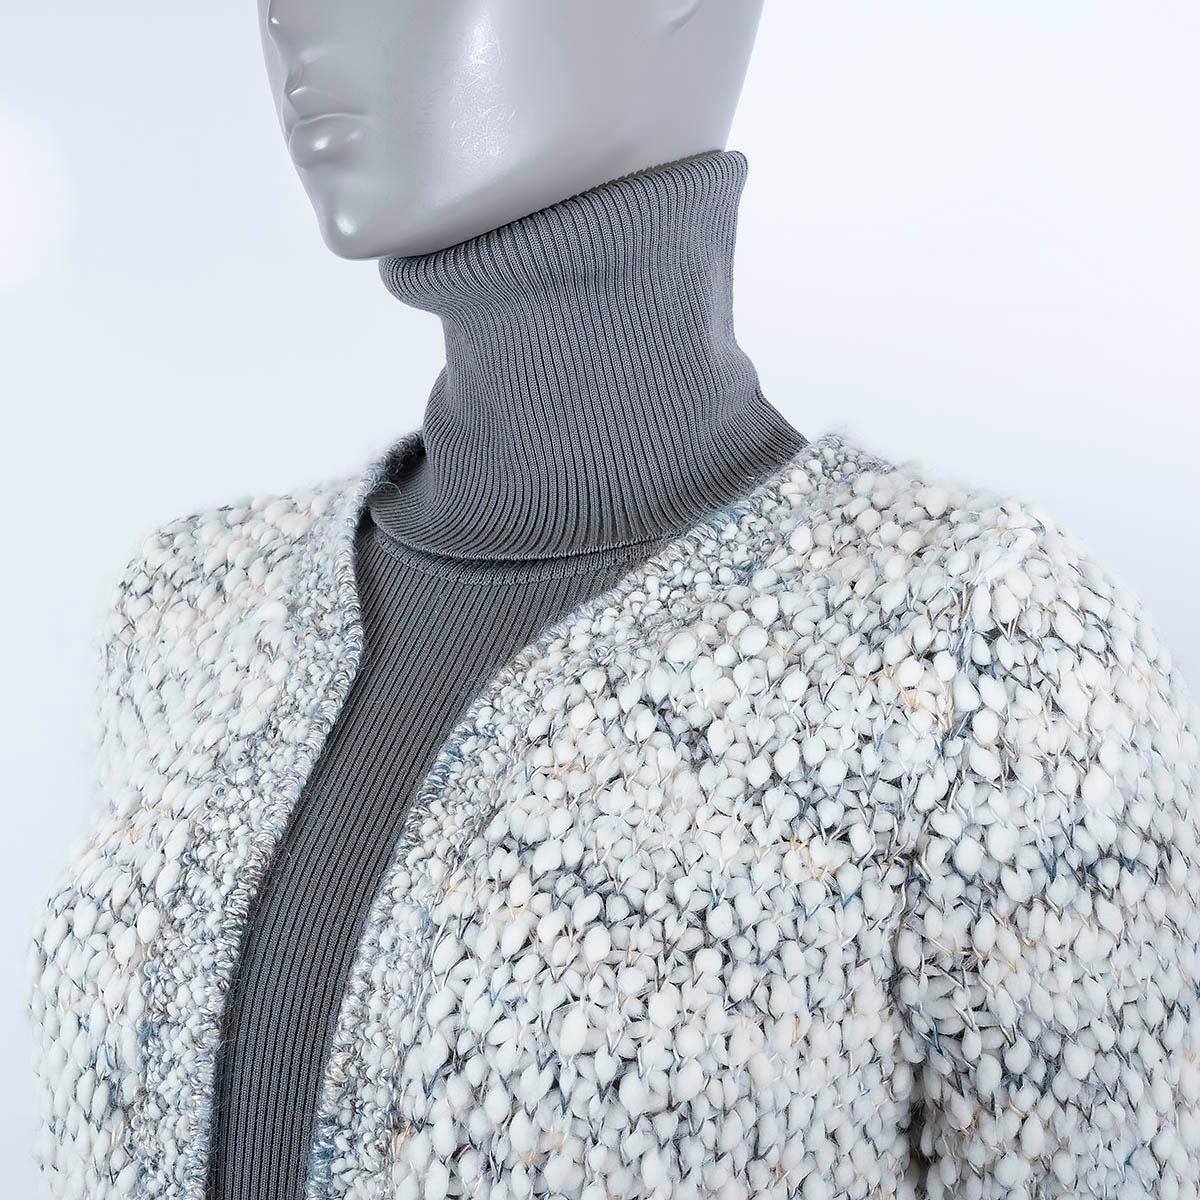 CHANEL silver grey & white 2016 16A ROME LAYERED BOUCLE Dress 38 S For Sale 3